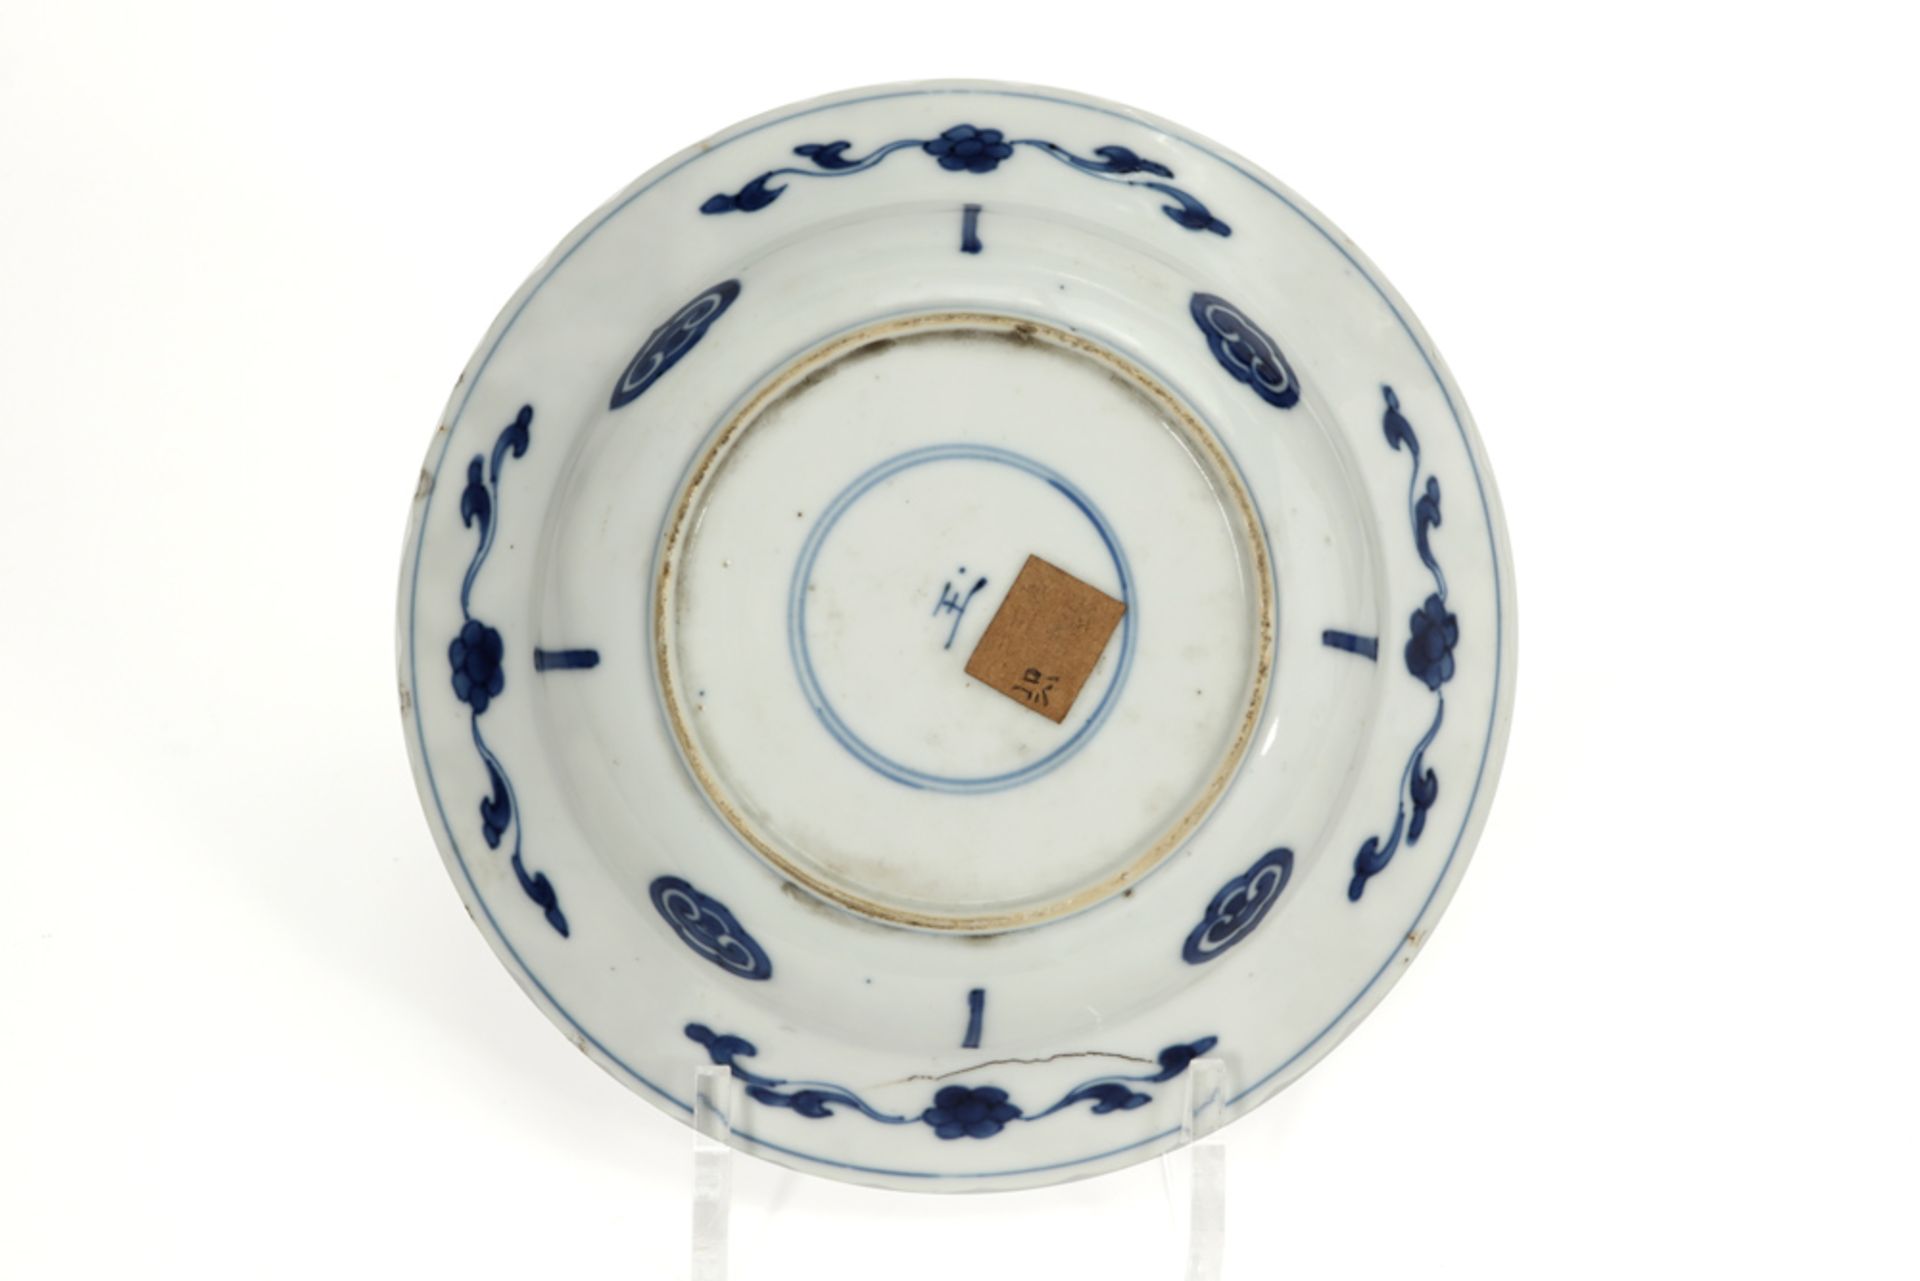 17th/18th Cent. Chinese Kang Hsi period plate in marked porcelain with a blue-white garden - Image 3 of 3